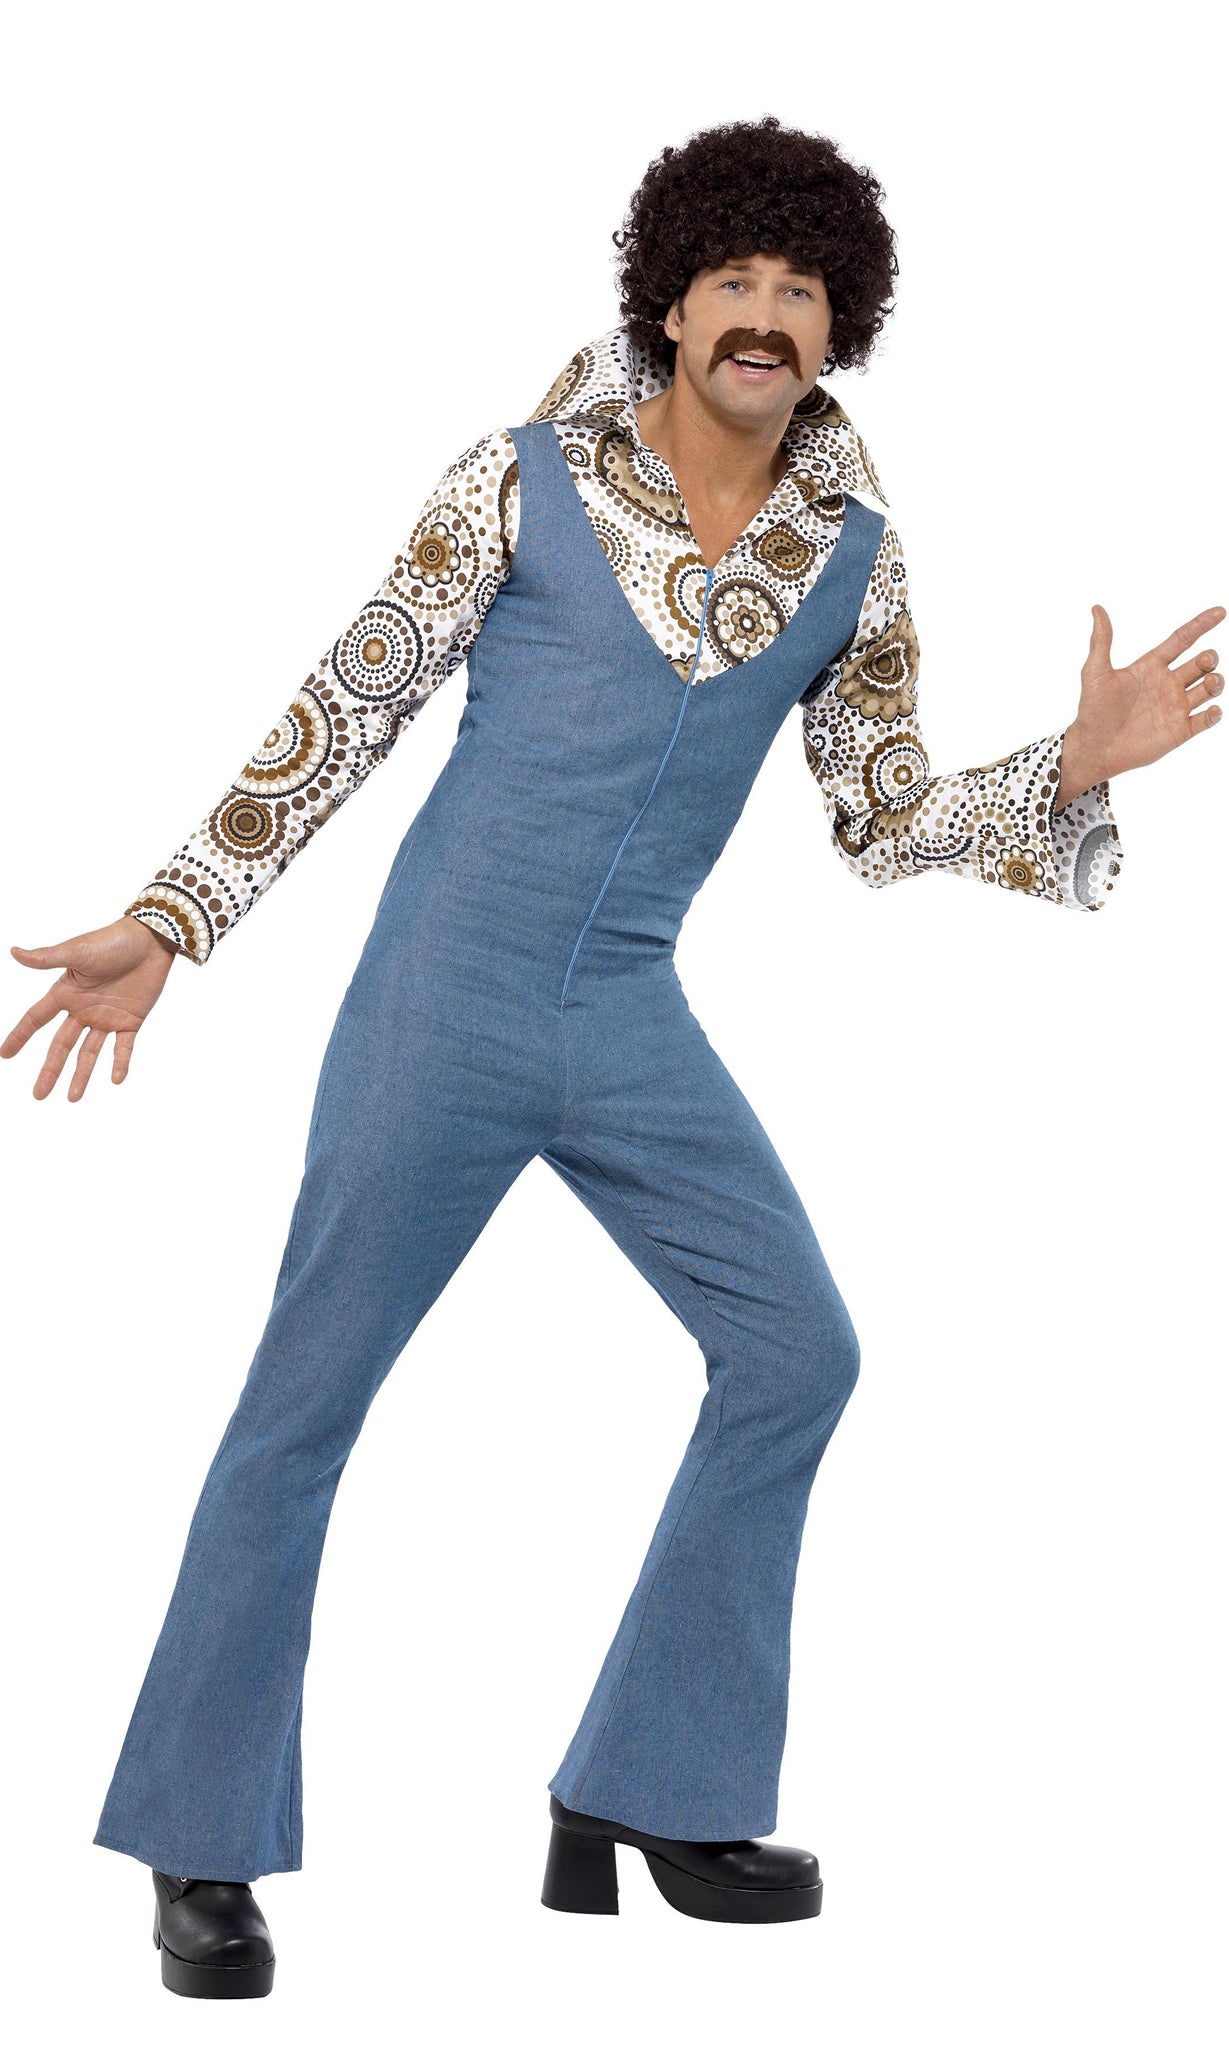 Men's blue 70s jumpsuit costume with attached 70s inspired shirt